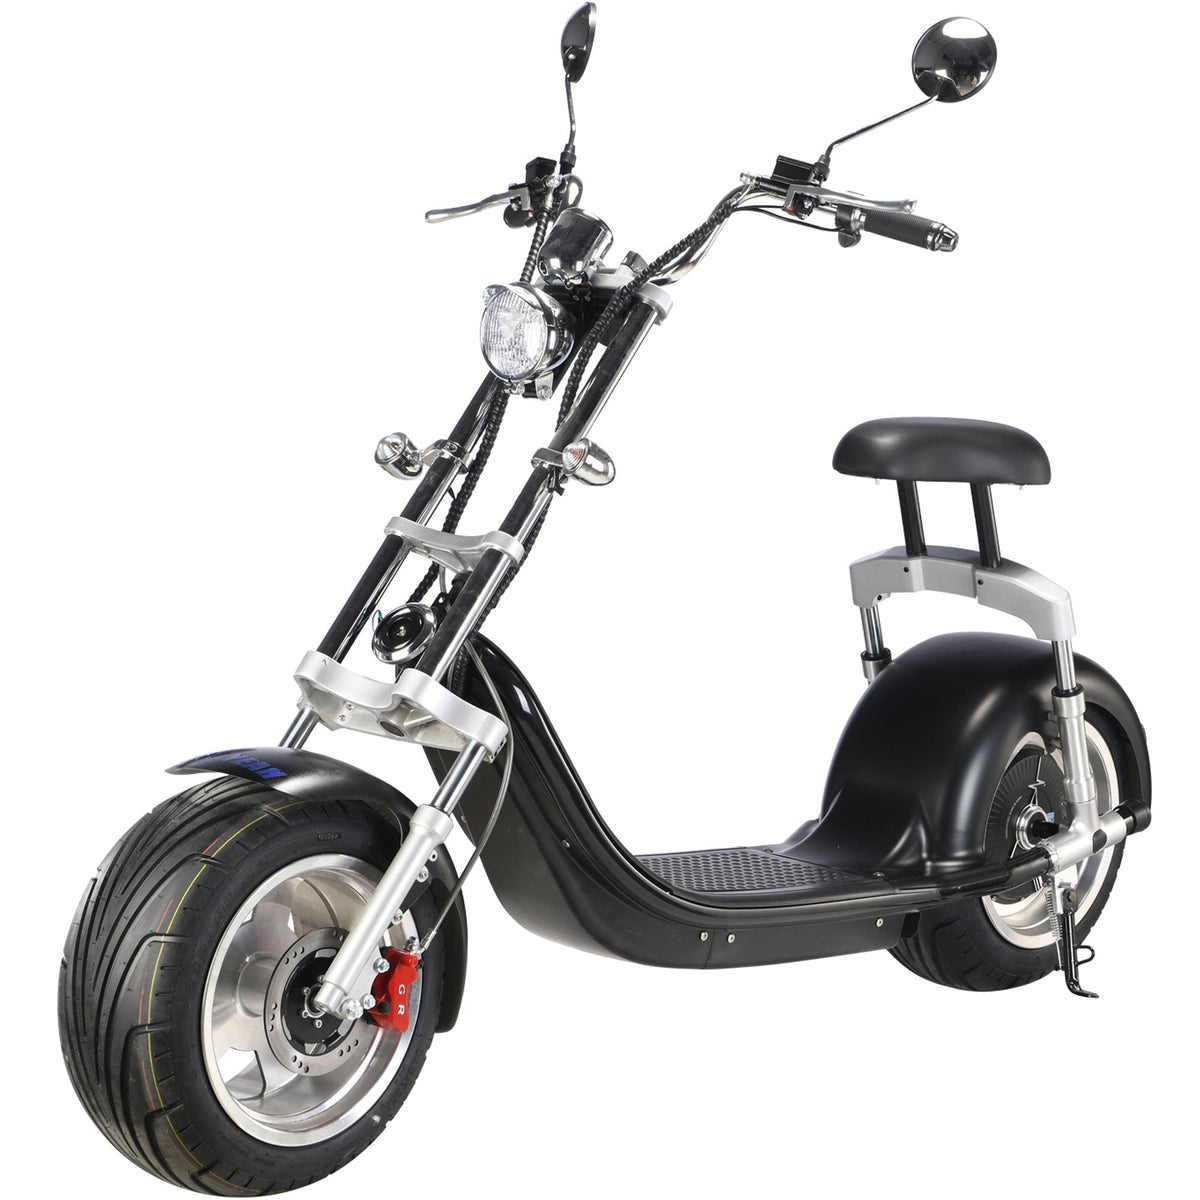 MotoTec Knockout 60V/12Ah 1000W Fat Tire Electric Scooter